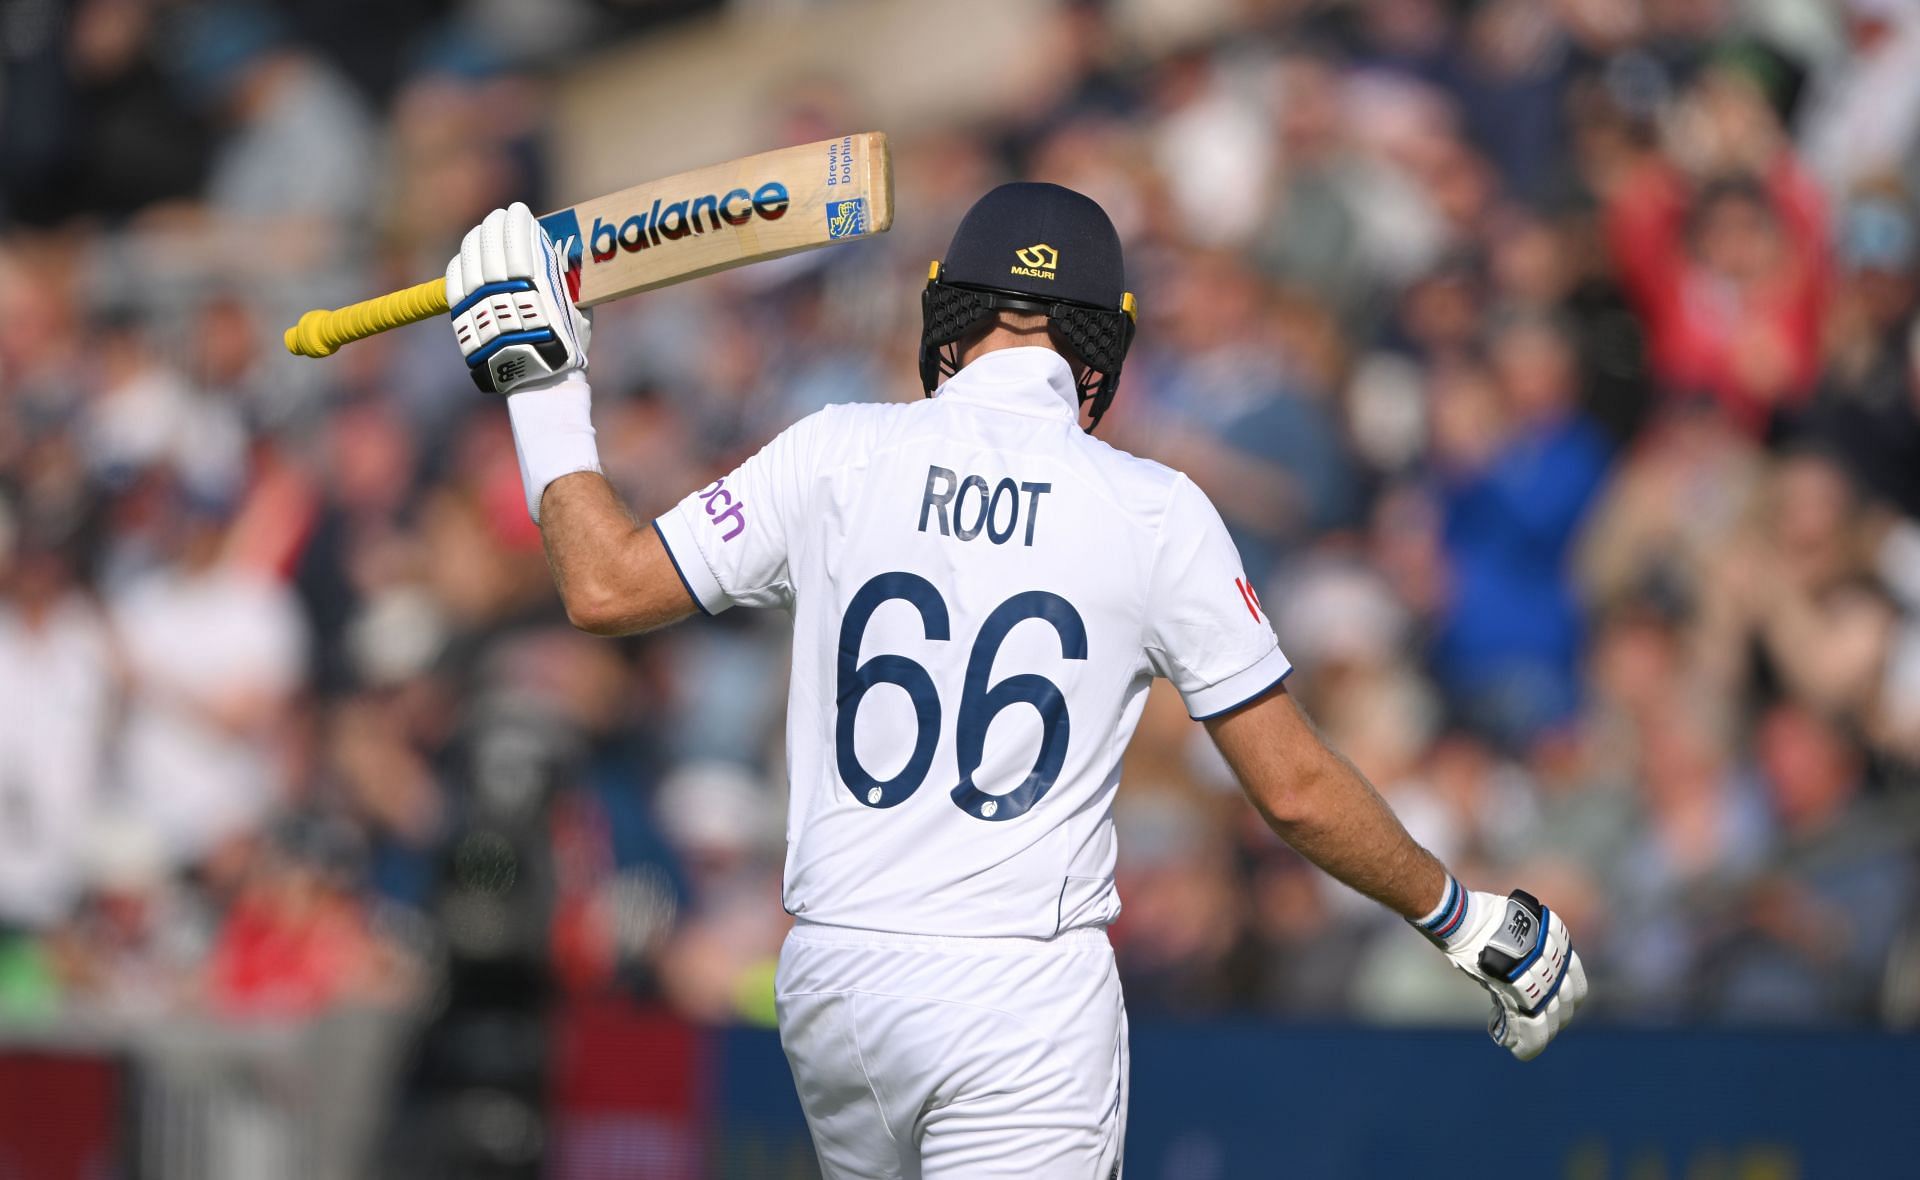 Joe Root will once again hold the key in final Ashes Test